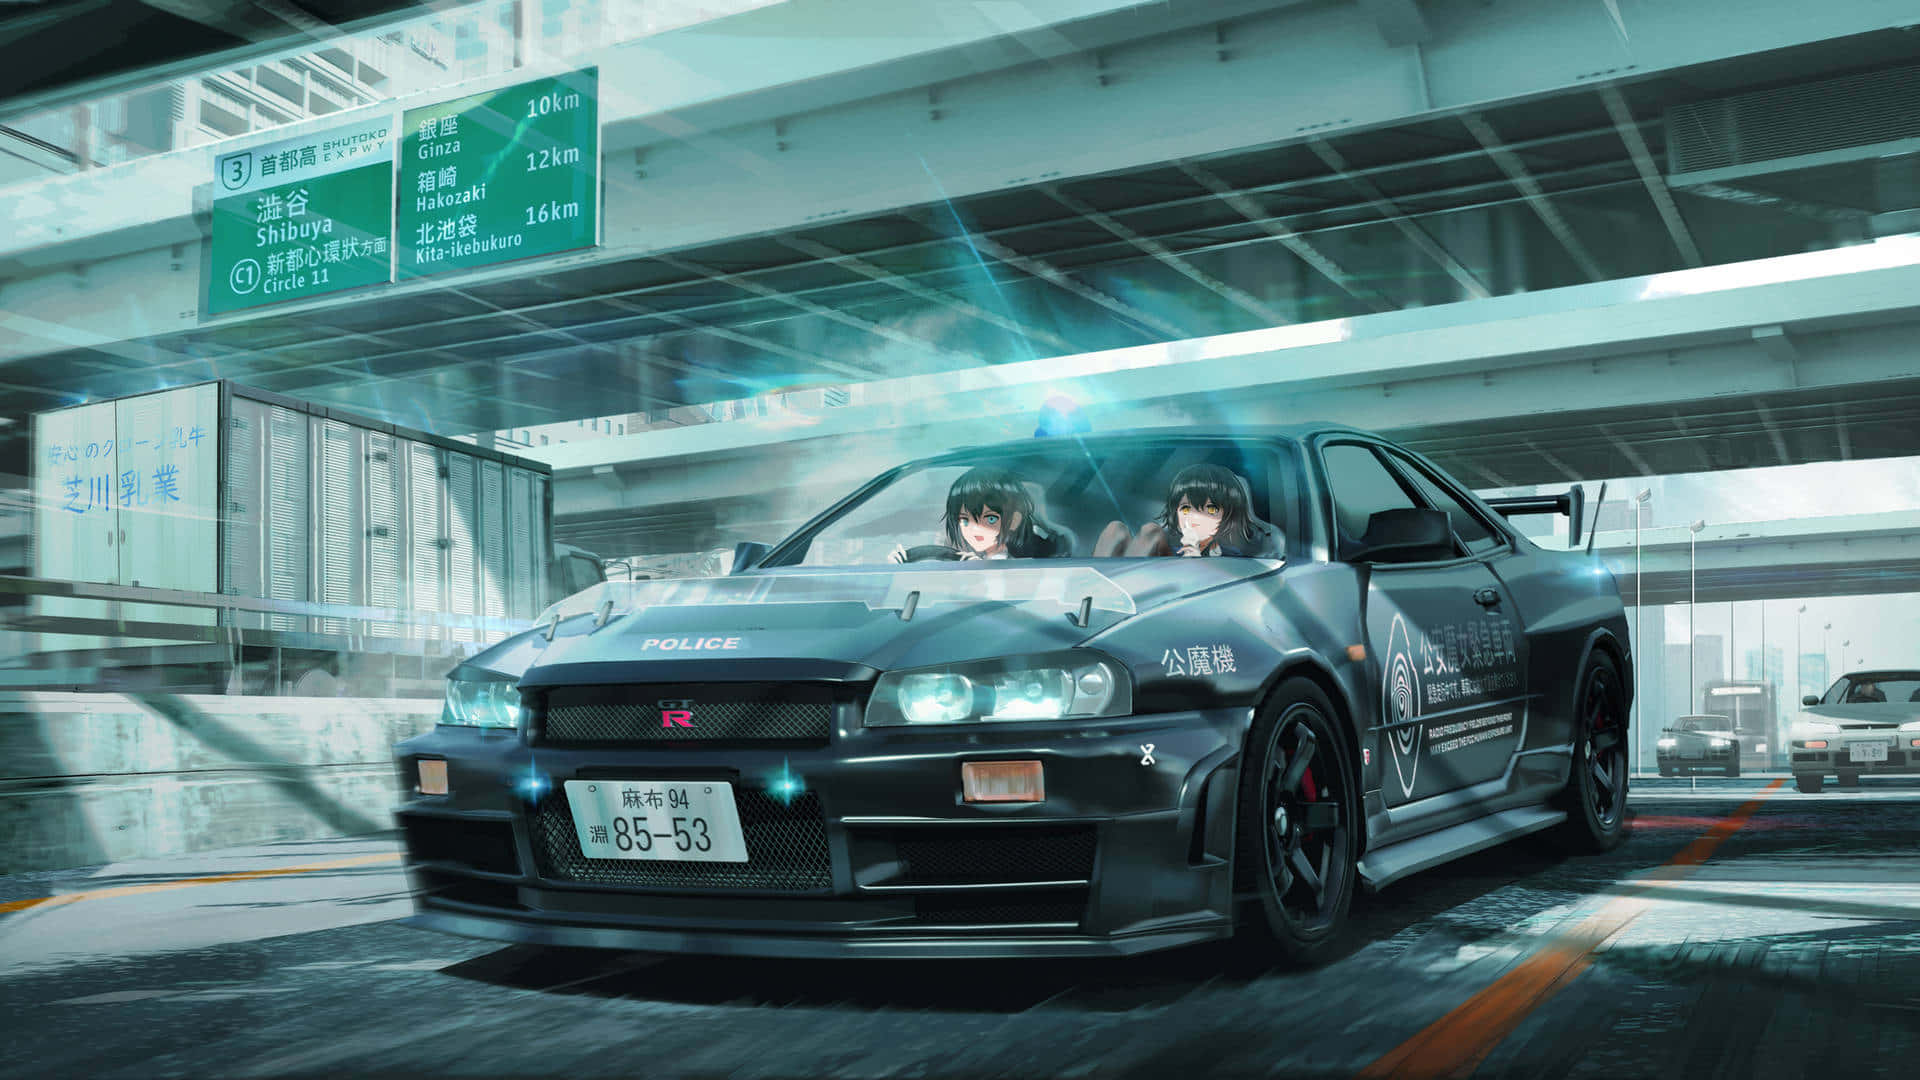 Unstoppable Power - An Anime Car